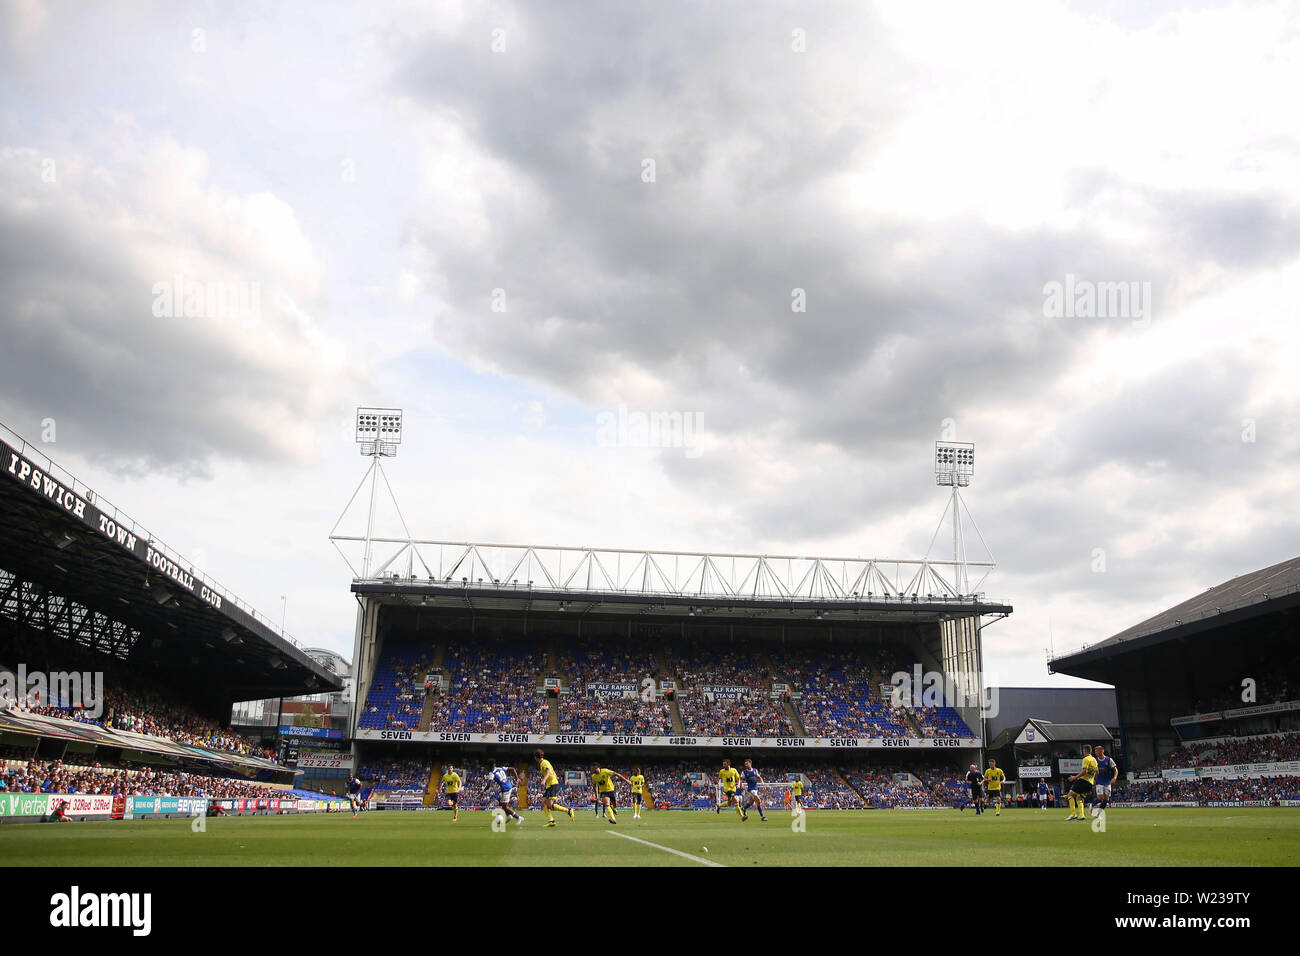 General view of Portman Road, Home of Ipswich Town Football Club during the match - Ipswich Town v Blackburn Rovers, Sky Bet Championship, Portman Road, Ipswich - 4th August 2018 Stock Photo